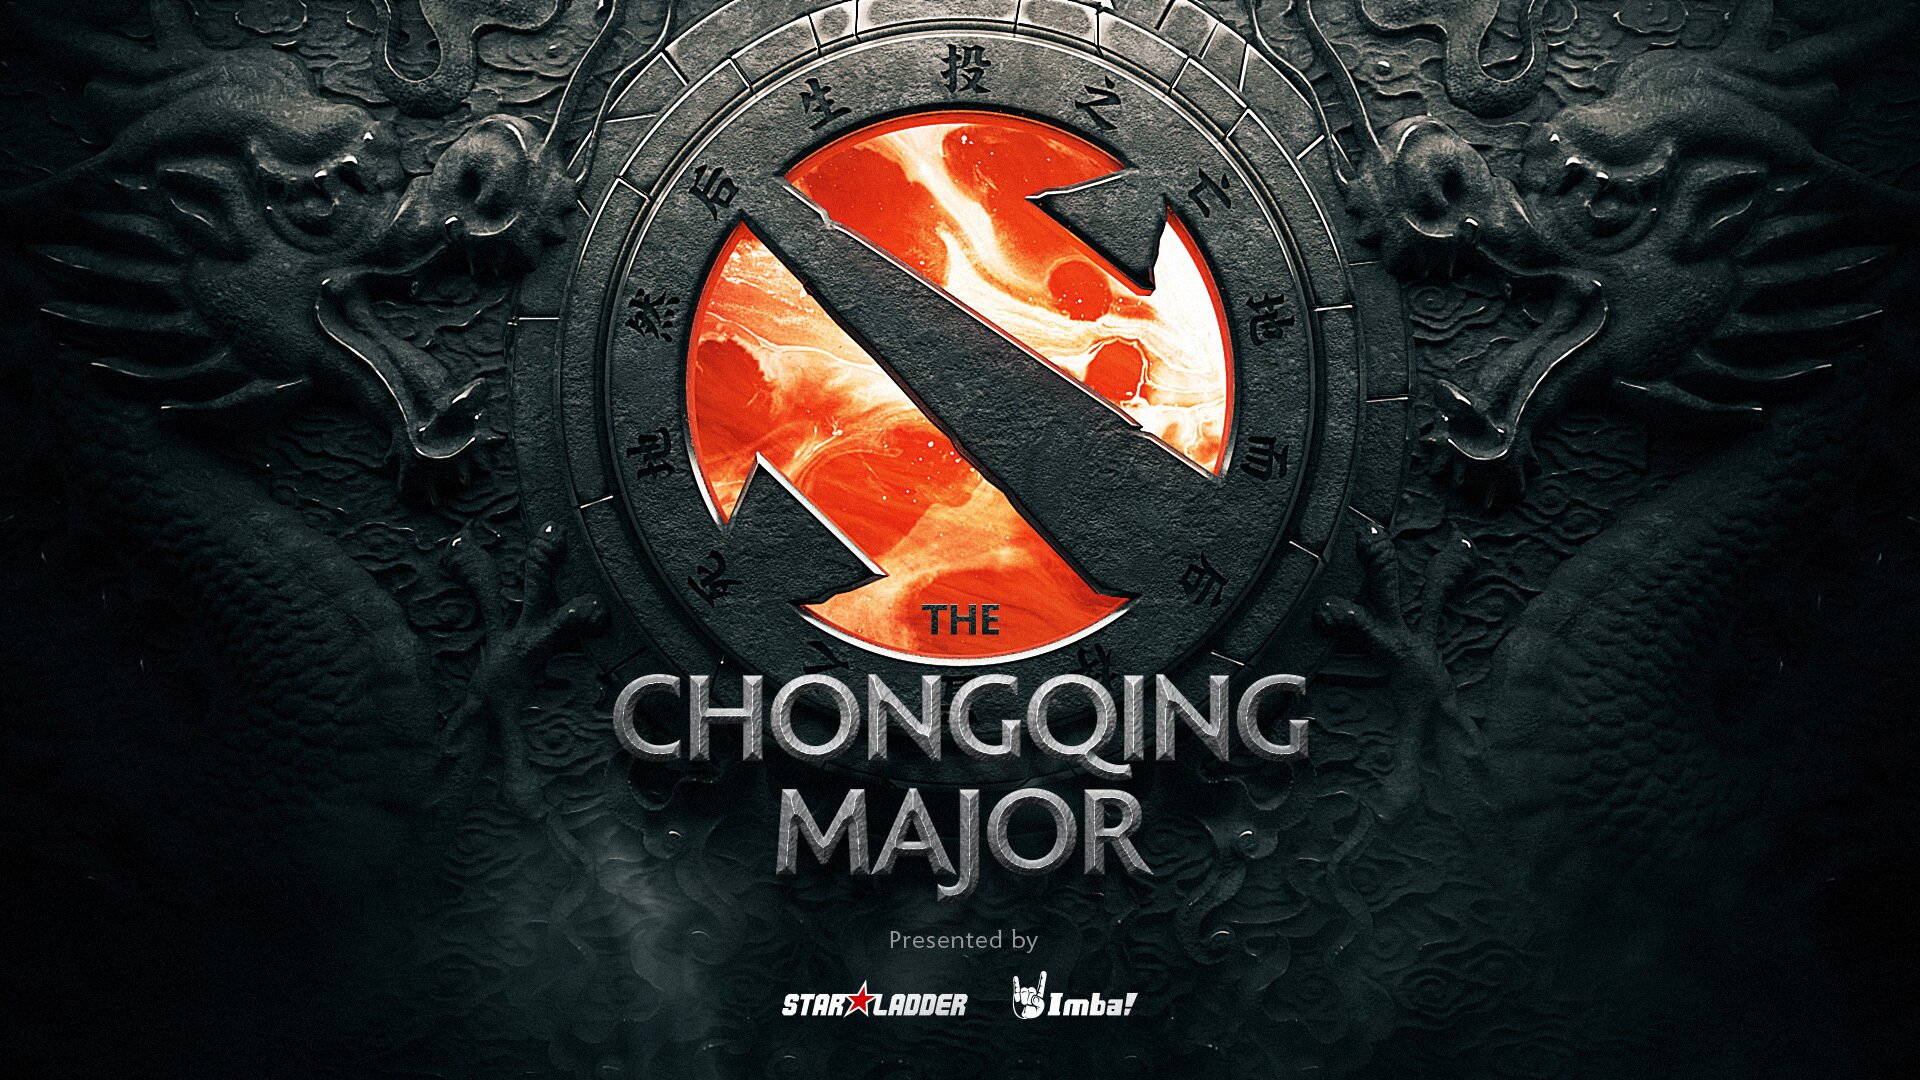 We’re quickly closing in on Chongqing Major, the first DPC Major of 2019, and the groups for the sixteen teams attending the Major have been announced.